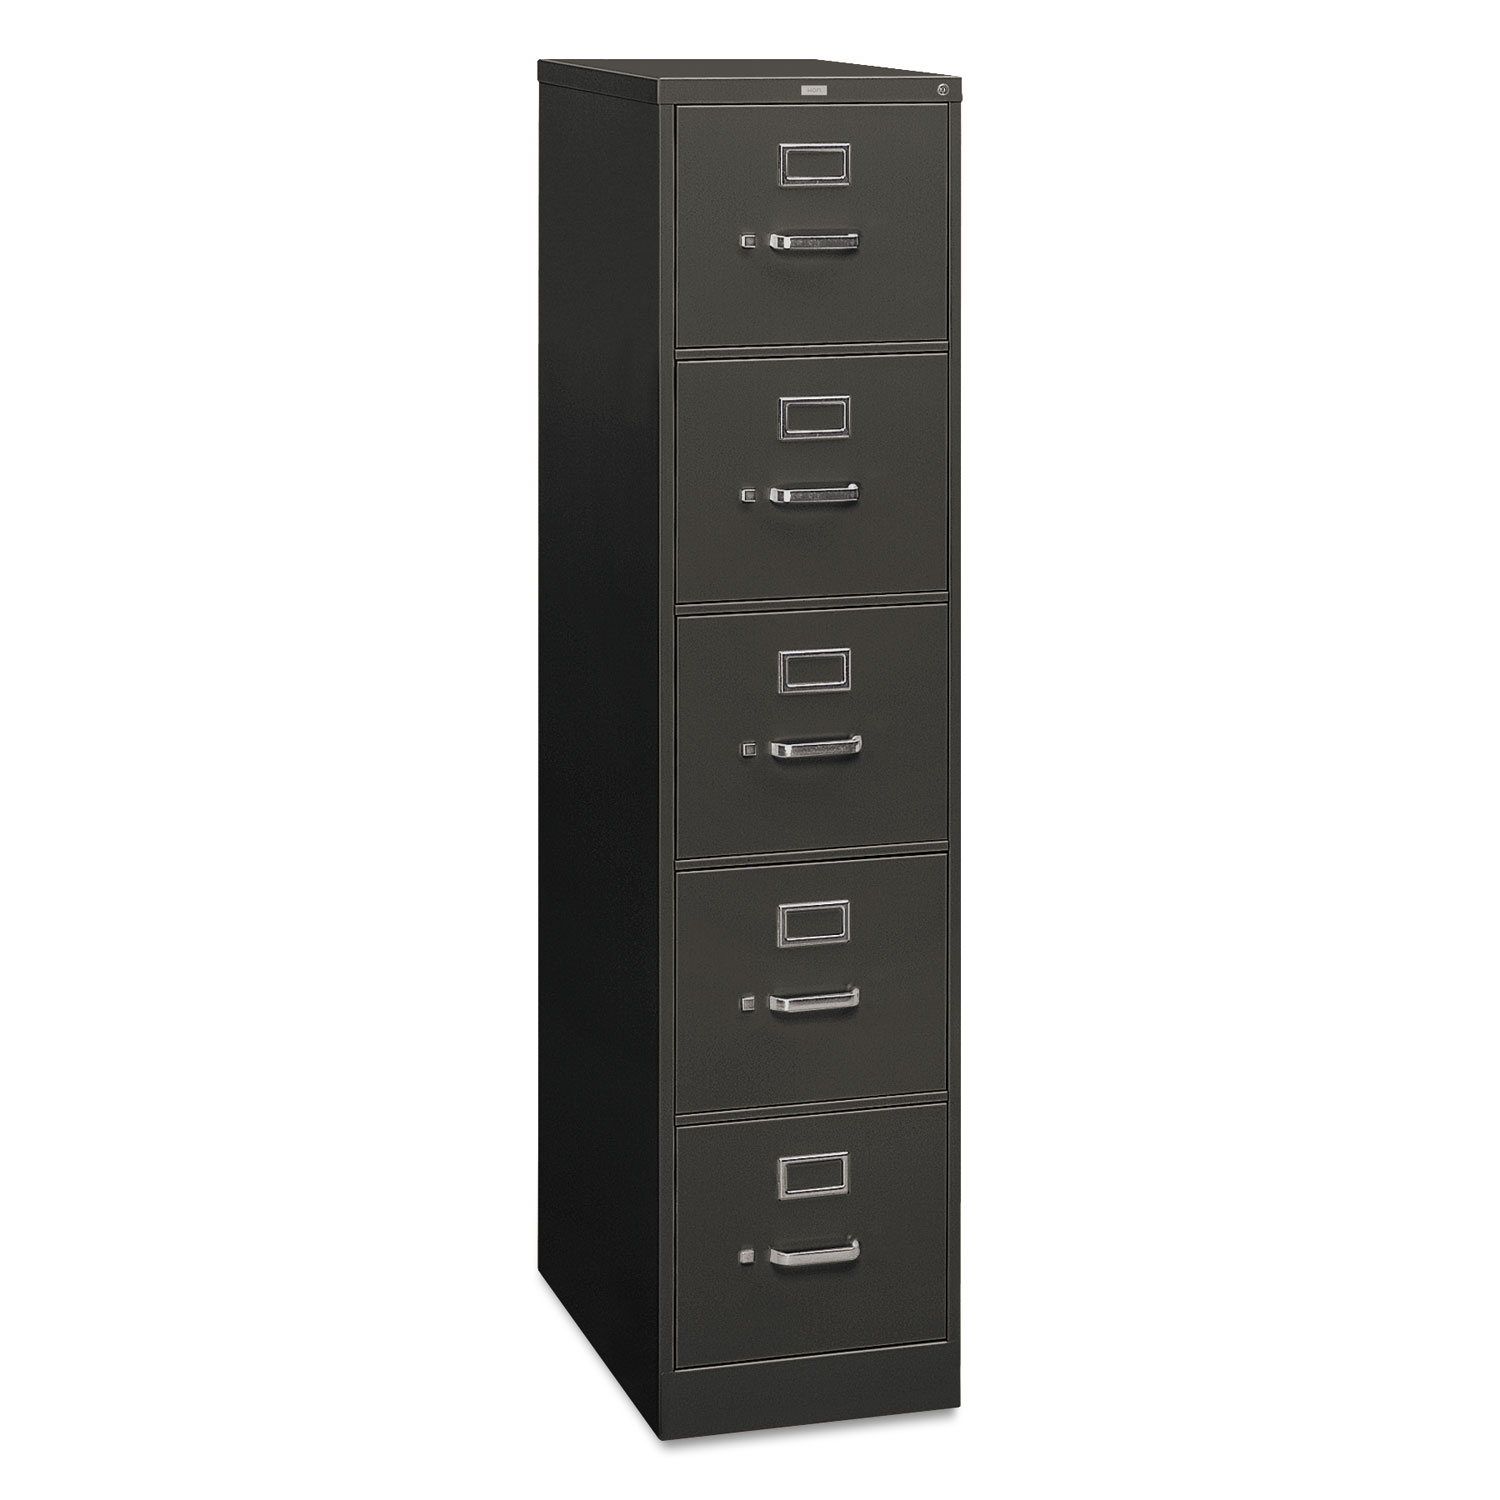  HON H315.P.S 310 Series Five-Drawer Full-Suspension File, Letter, 15w x 26.5d x 60h, Charcoal (HON315PS) 